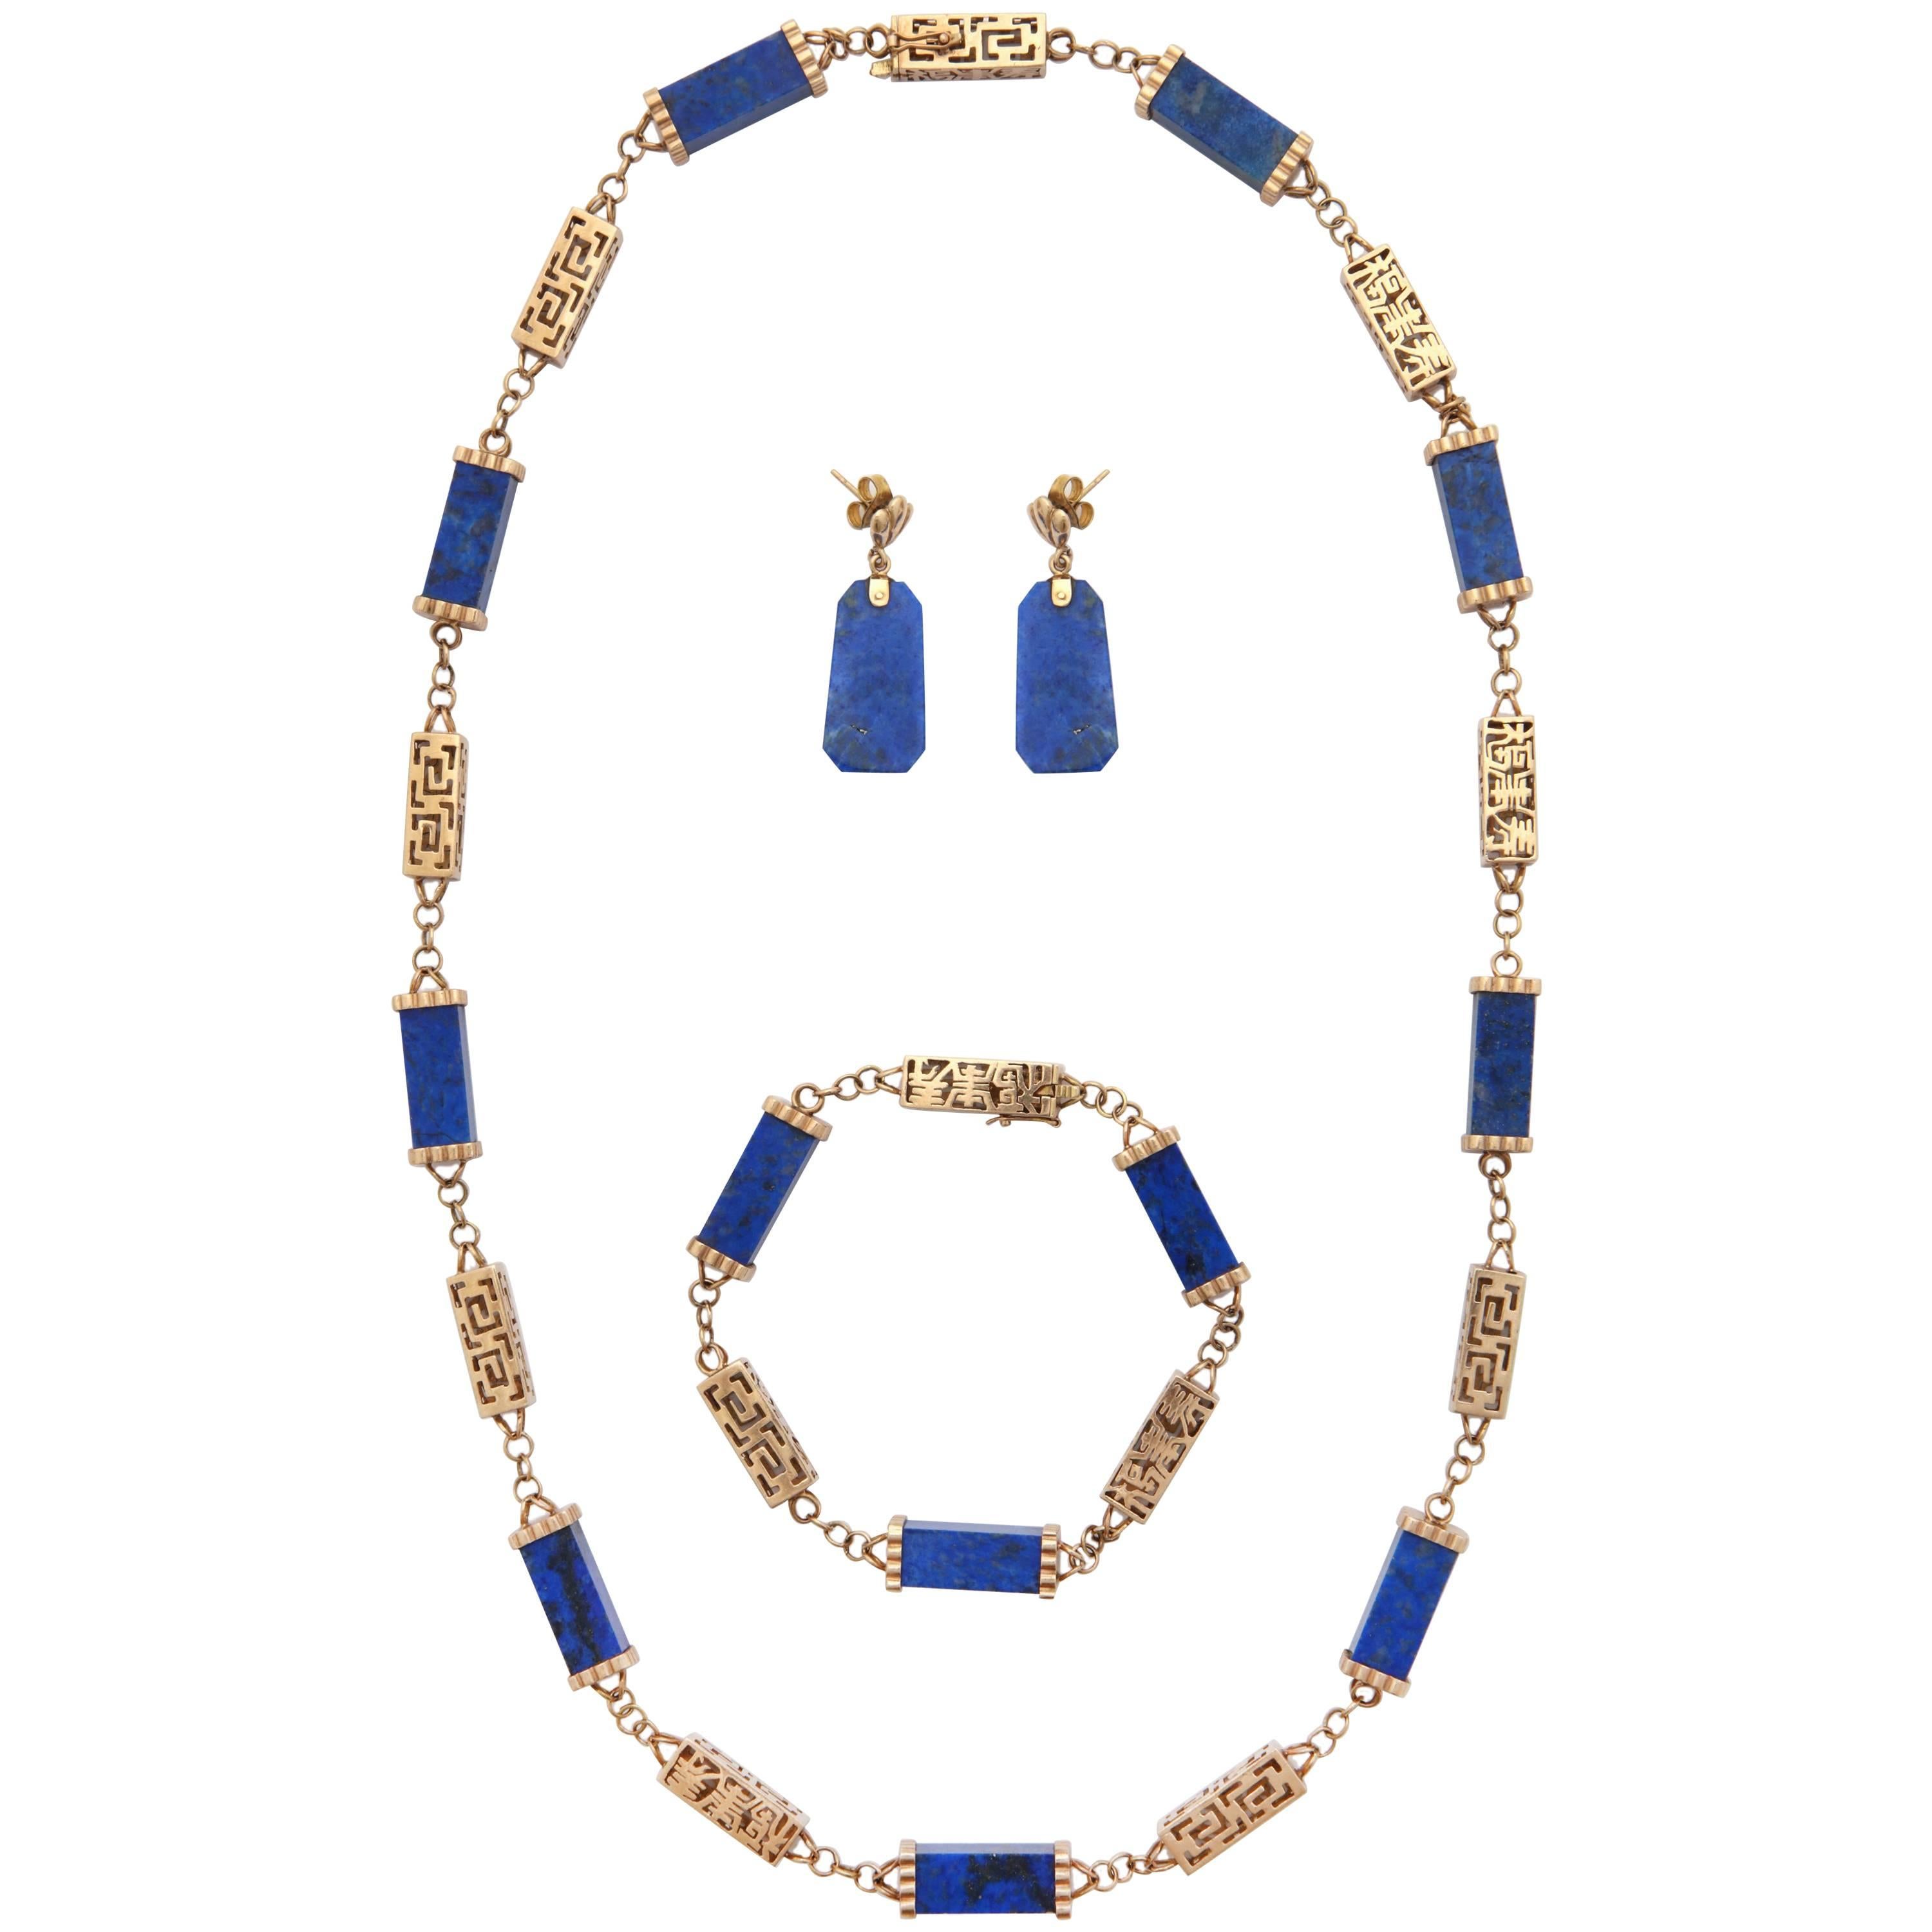 1950s Three Dimensional Cylinder Shape Lapis Lazuli and Reticulated Gold Chain